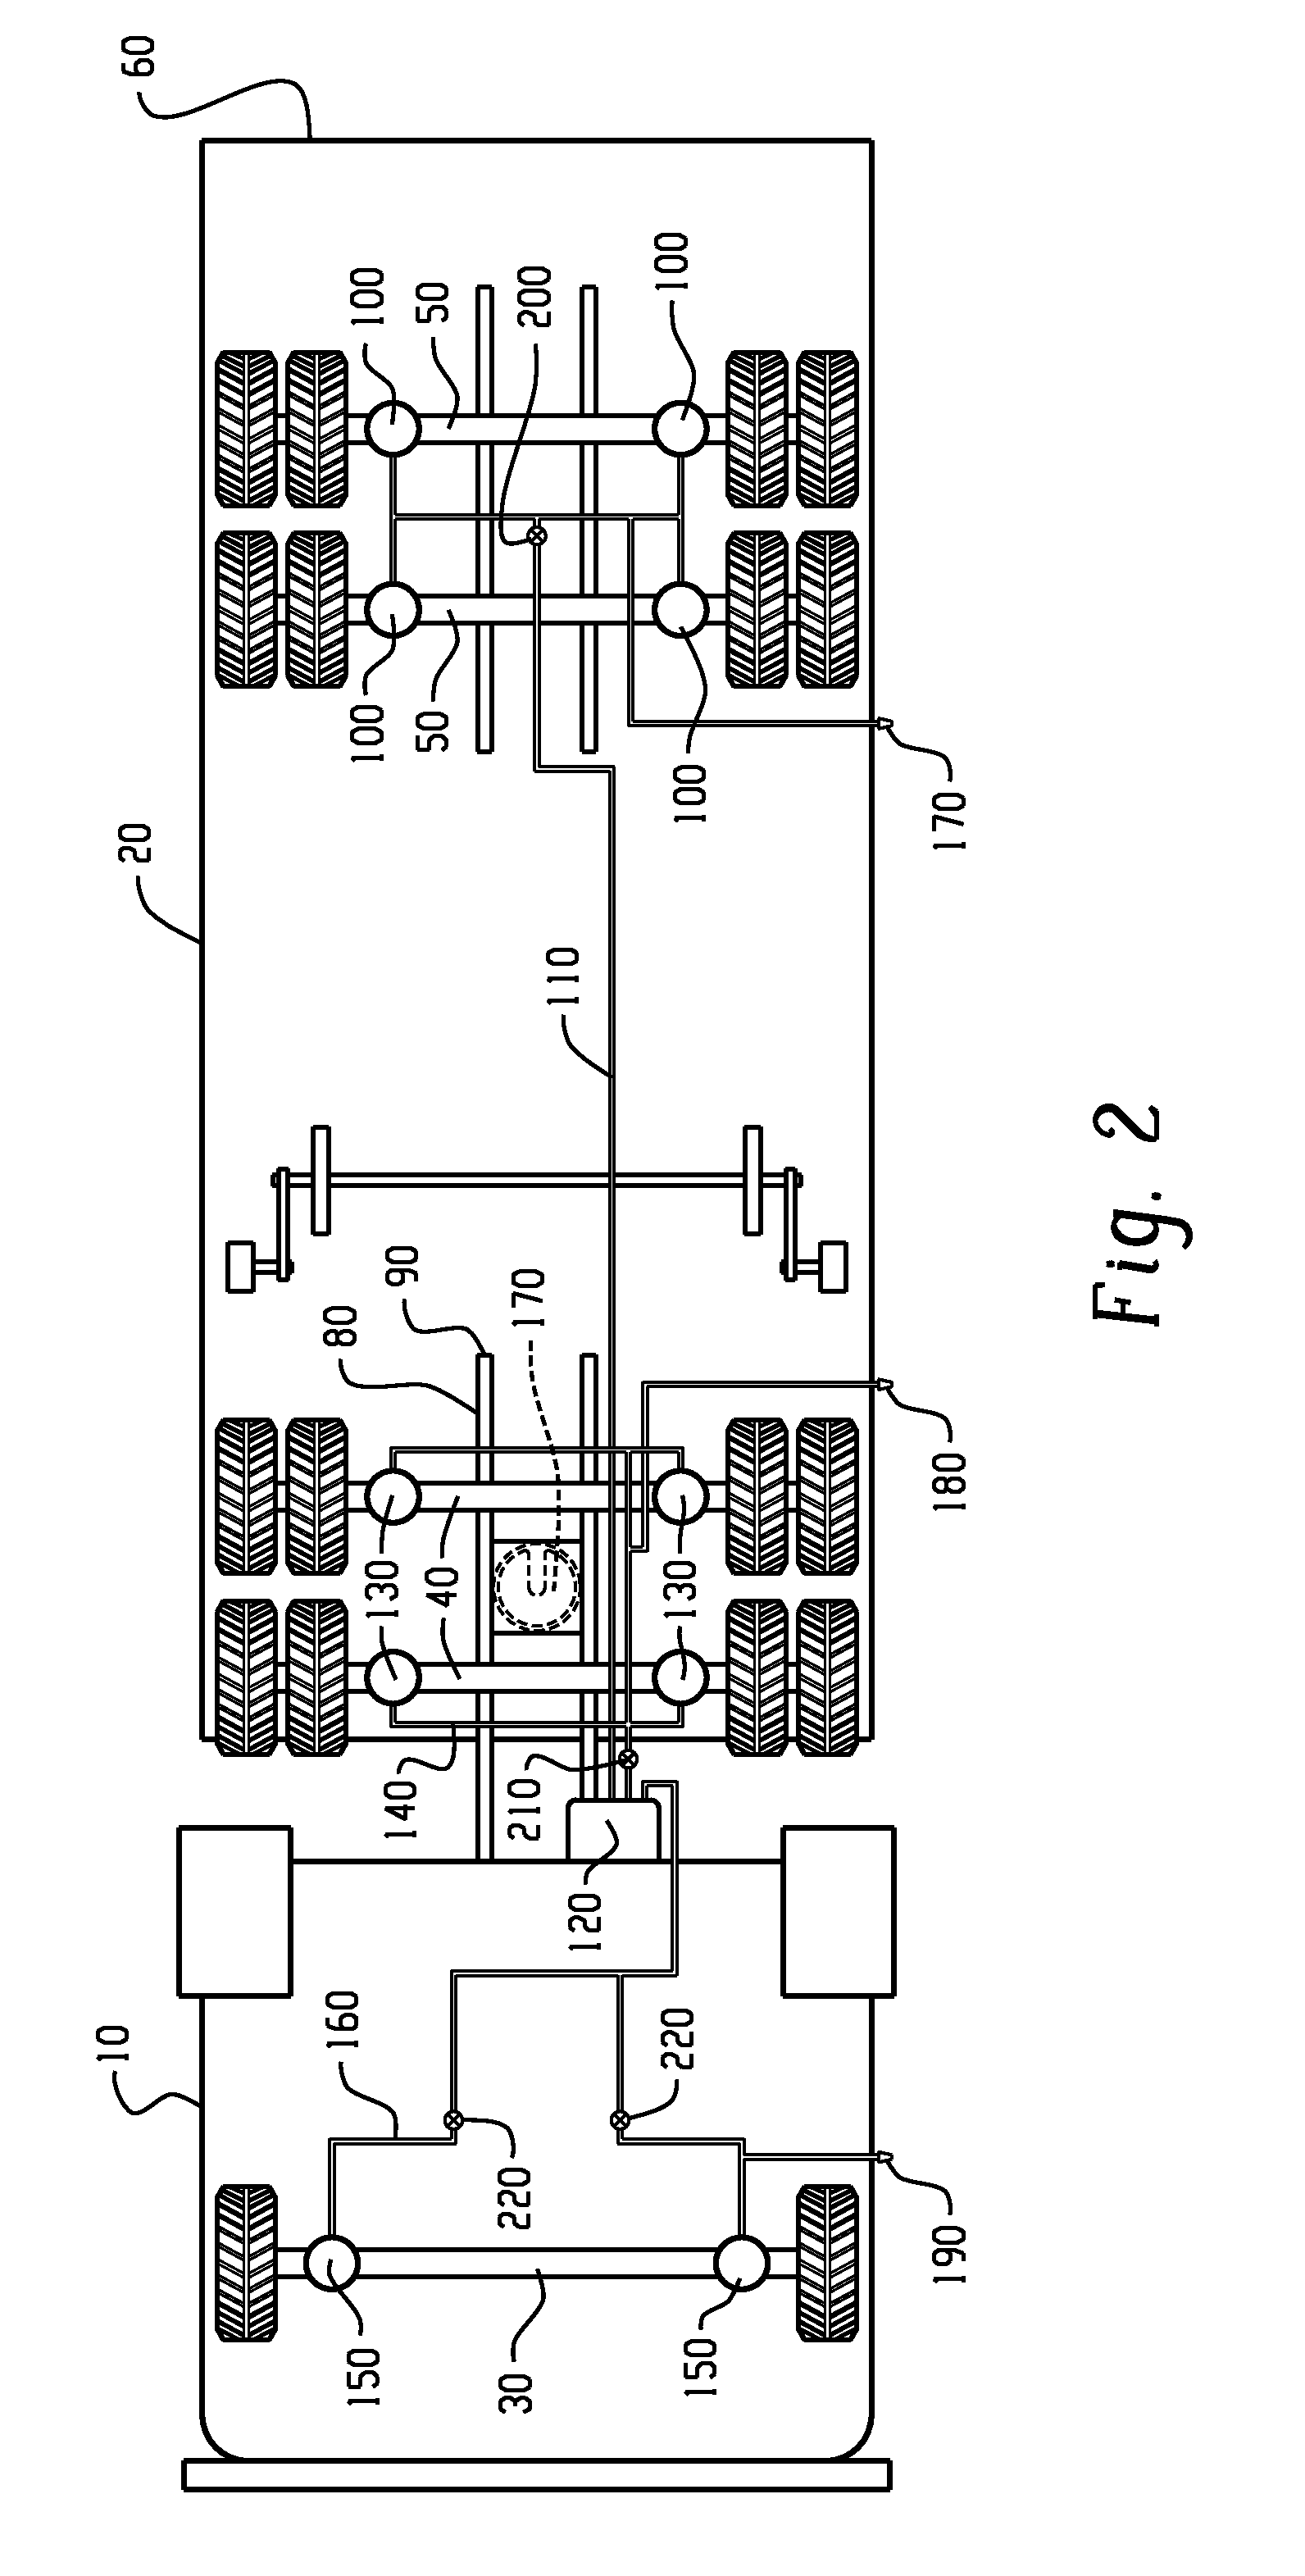 System and method for determining whether the weight of a vehicle equipped with an air-ride suspension exceeds predetermined roadway weight limitations